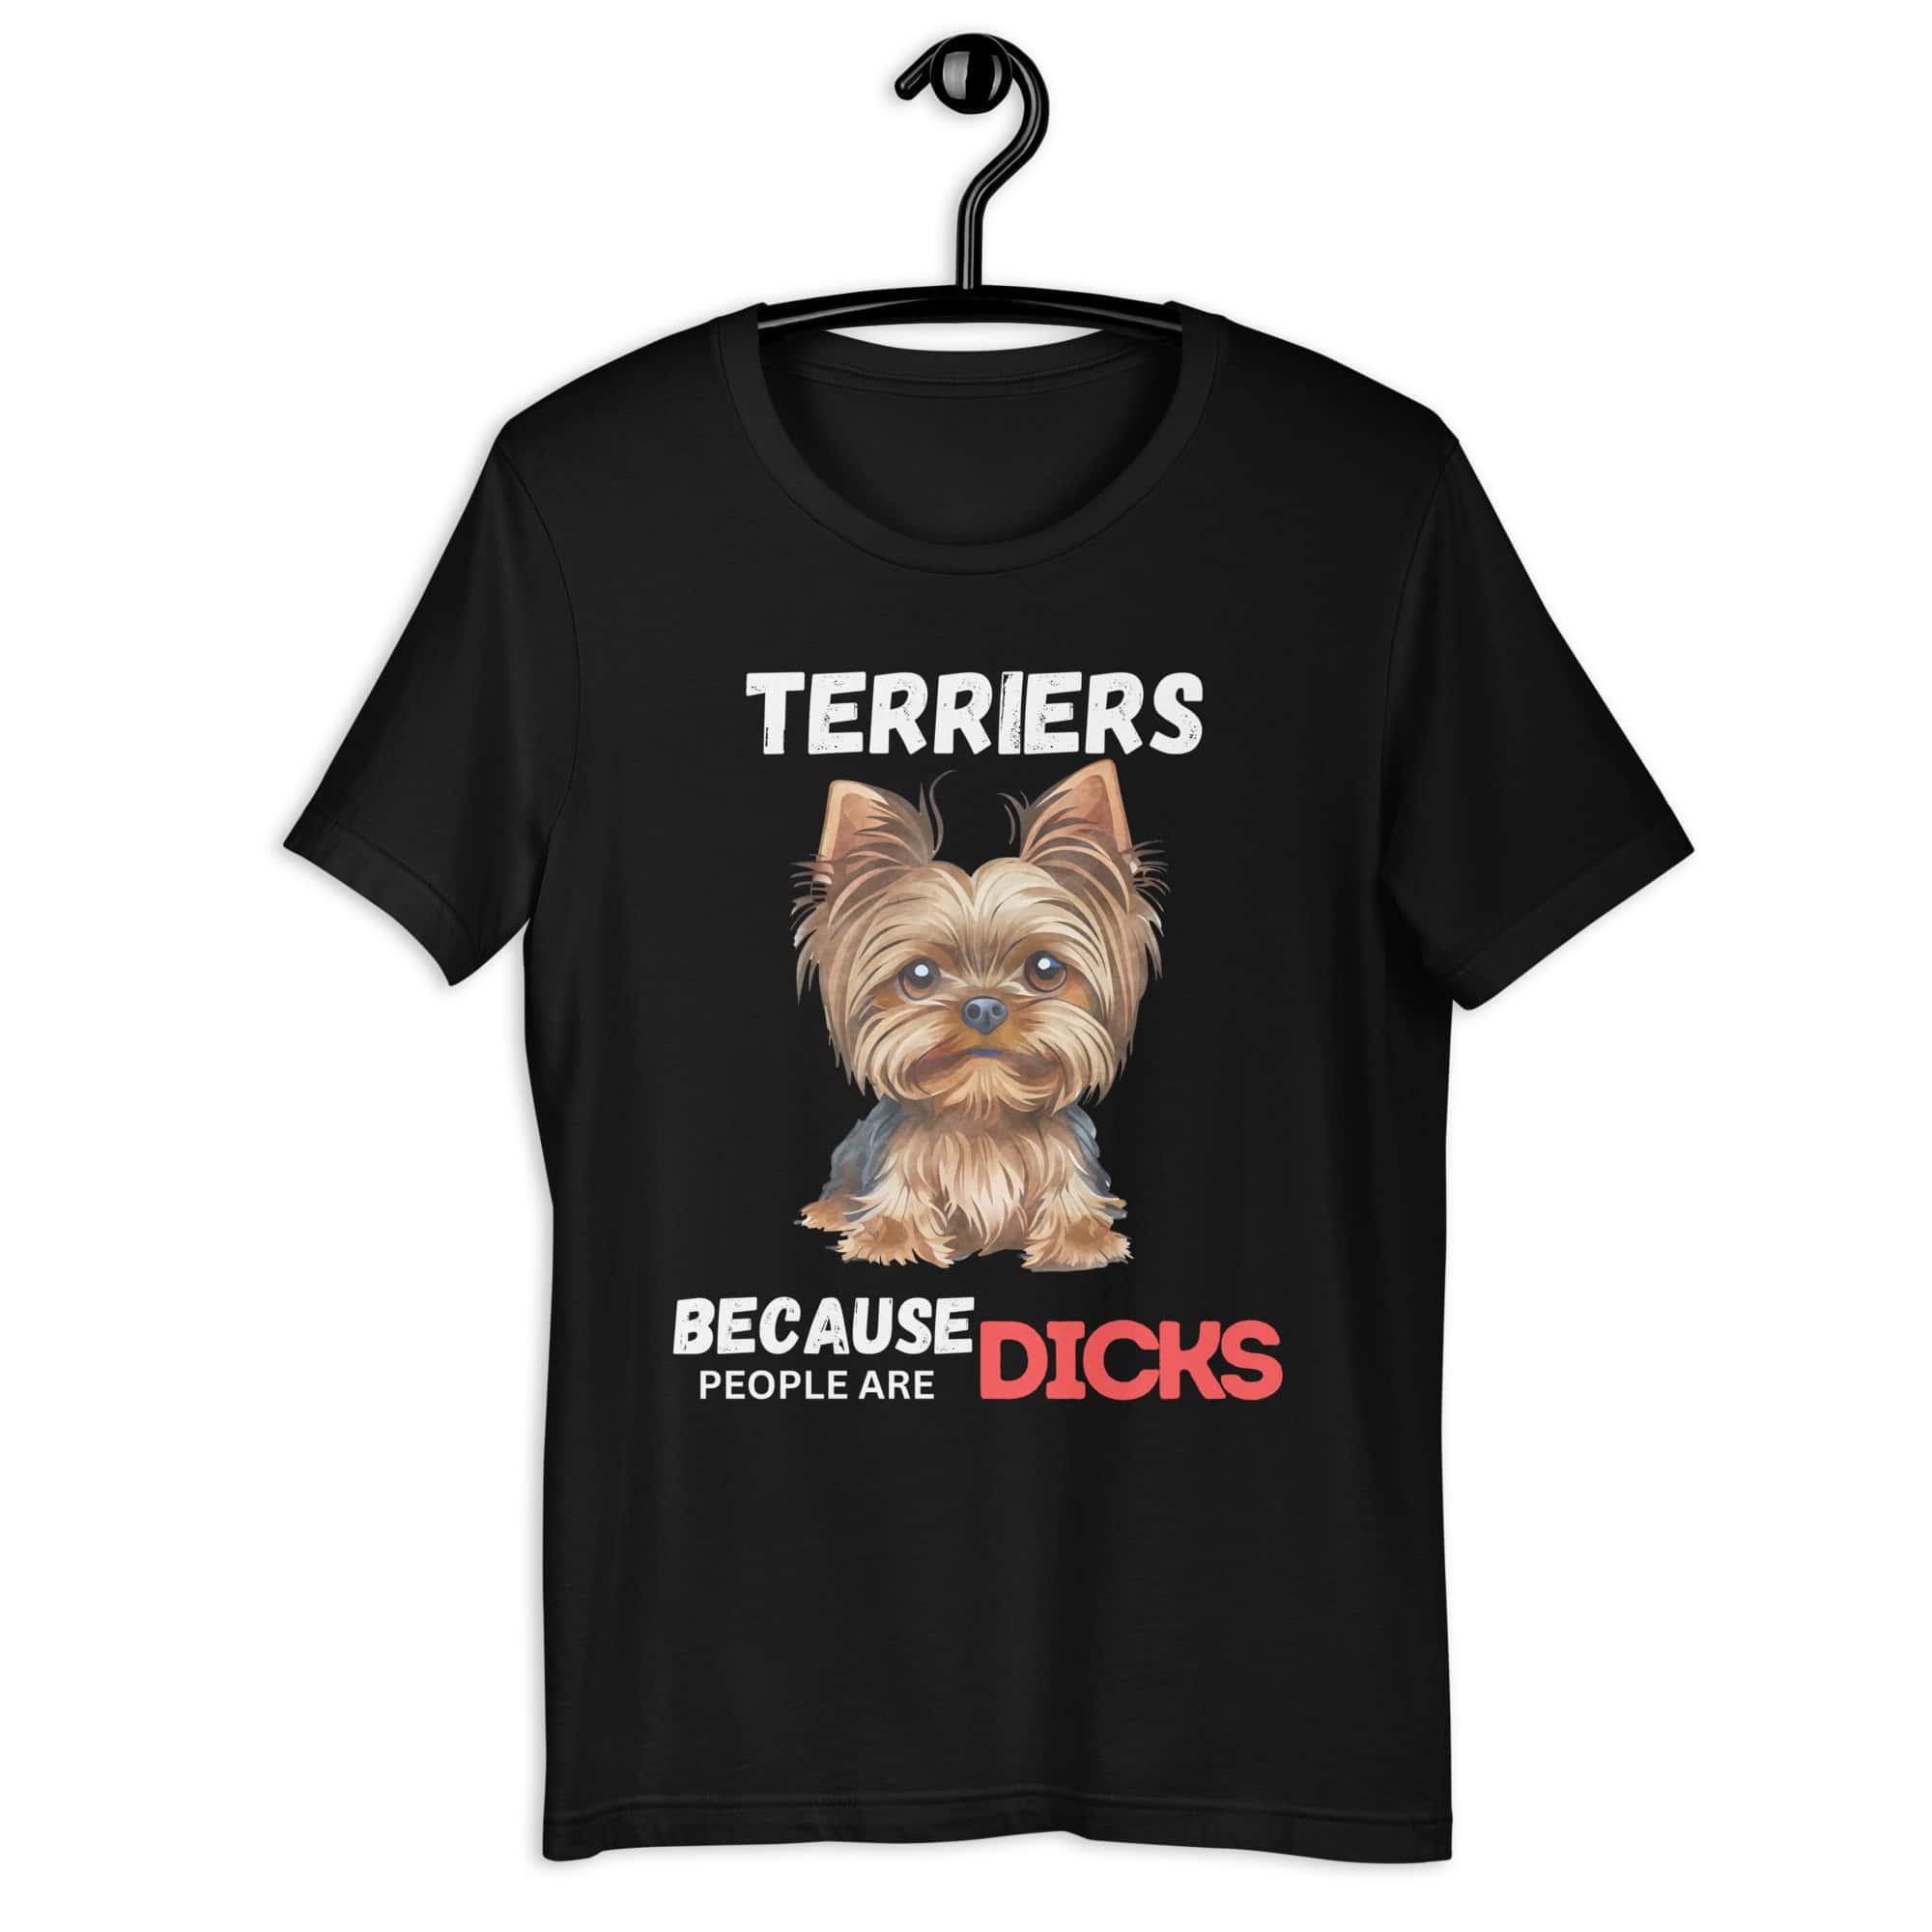 Yorkshire Terriers Because People Are Dicks Unisex T-Shirt - jet black